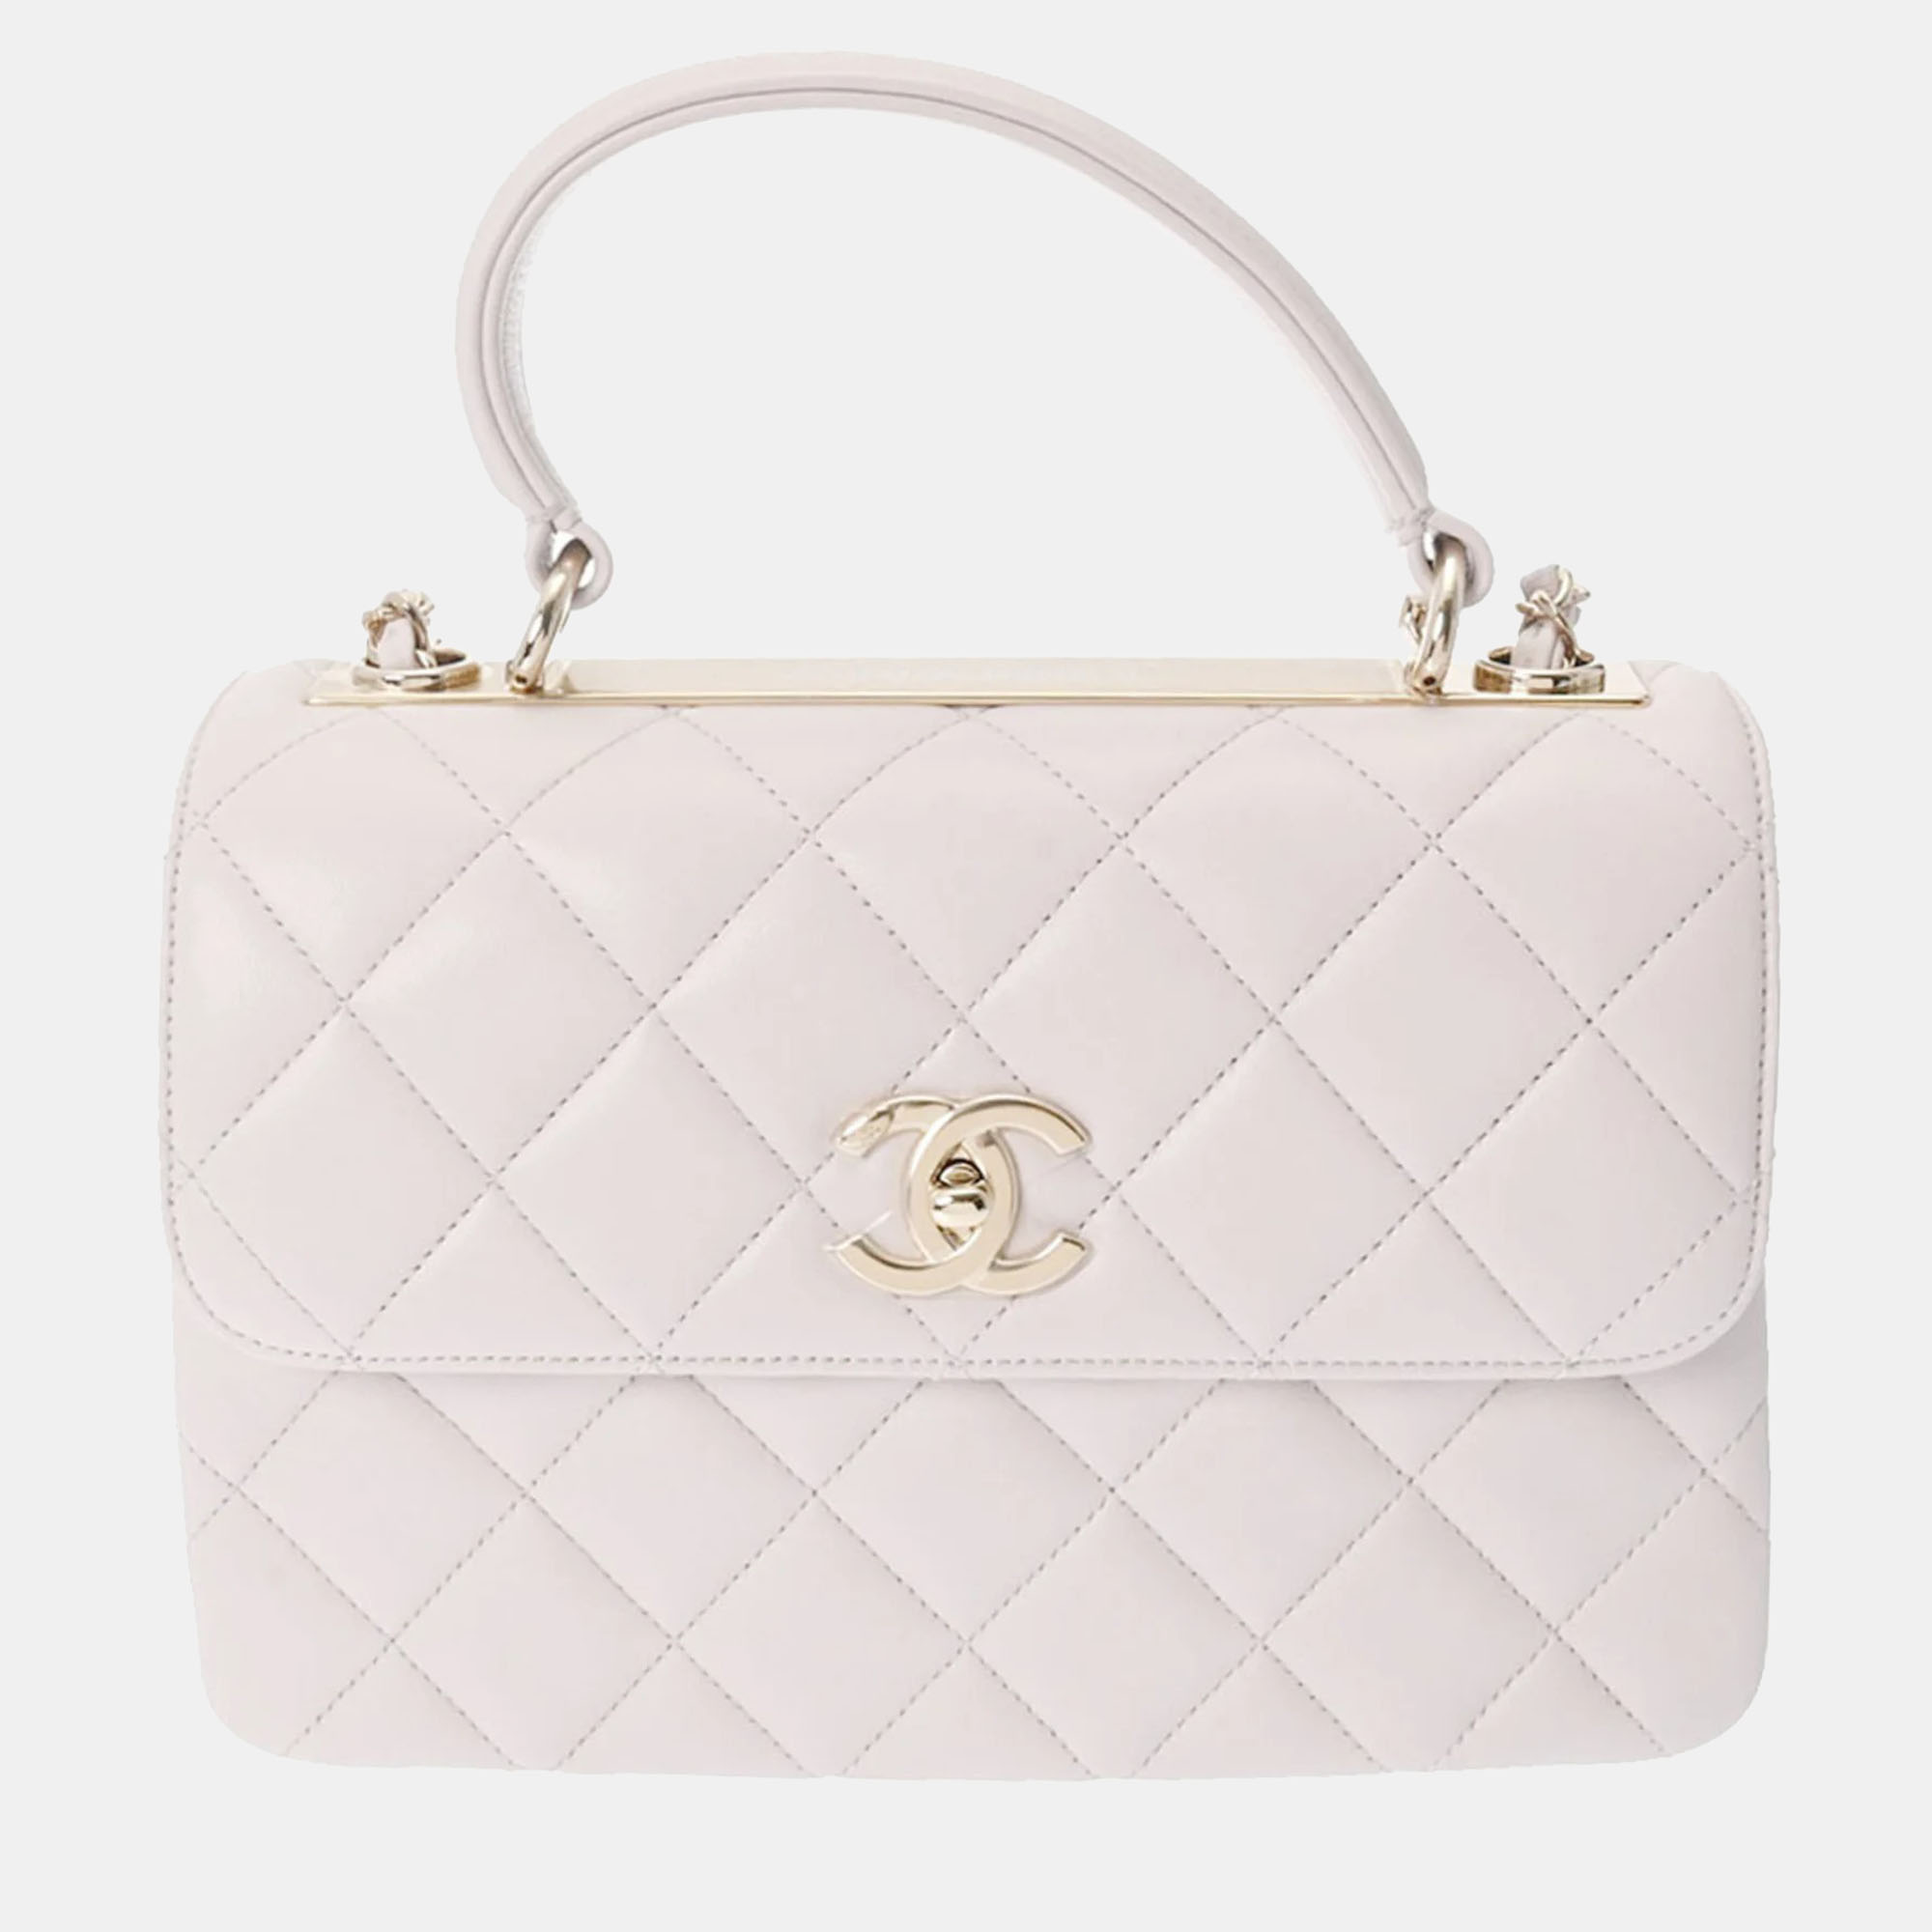 Chanel white lambskin small cc trendy limited edition  top handle bag